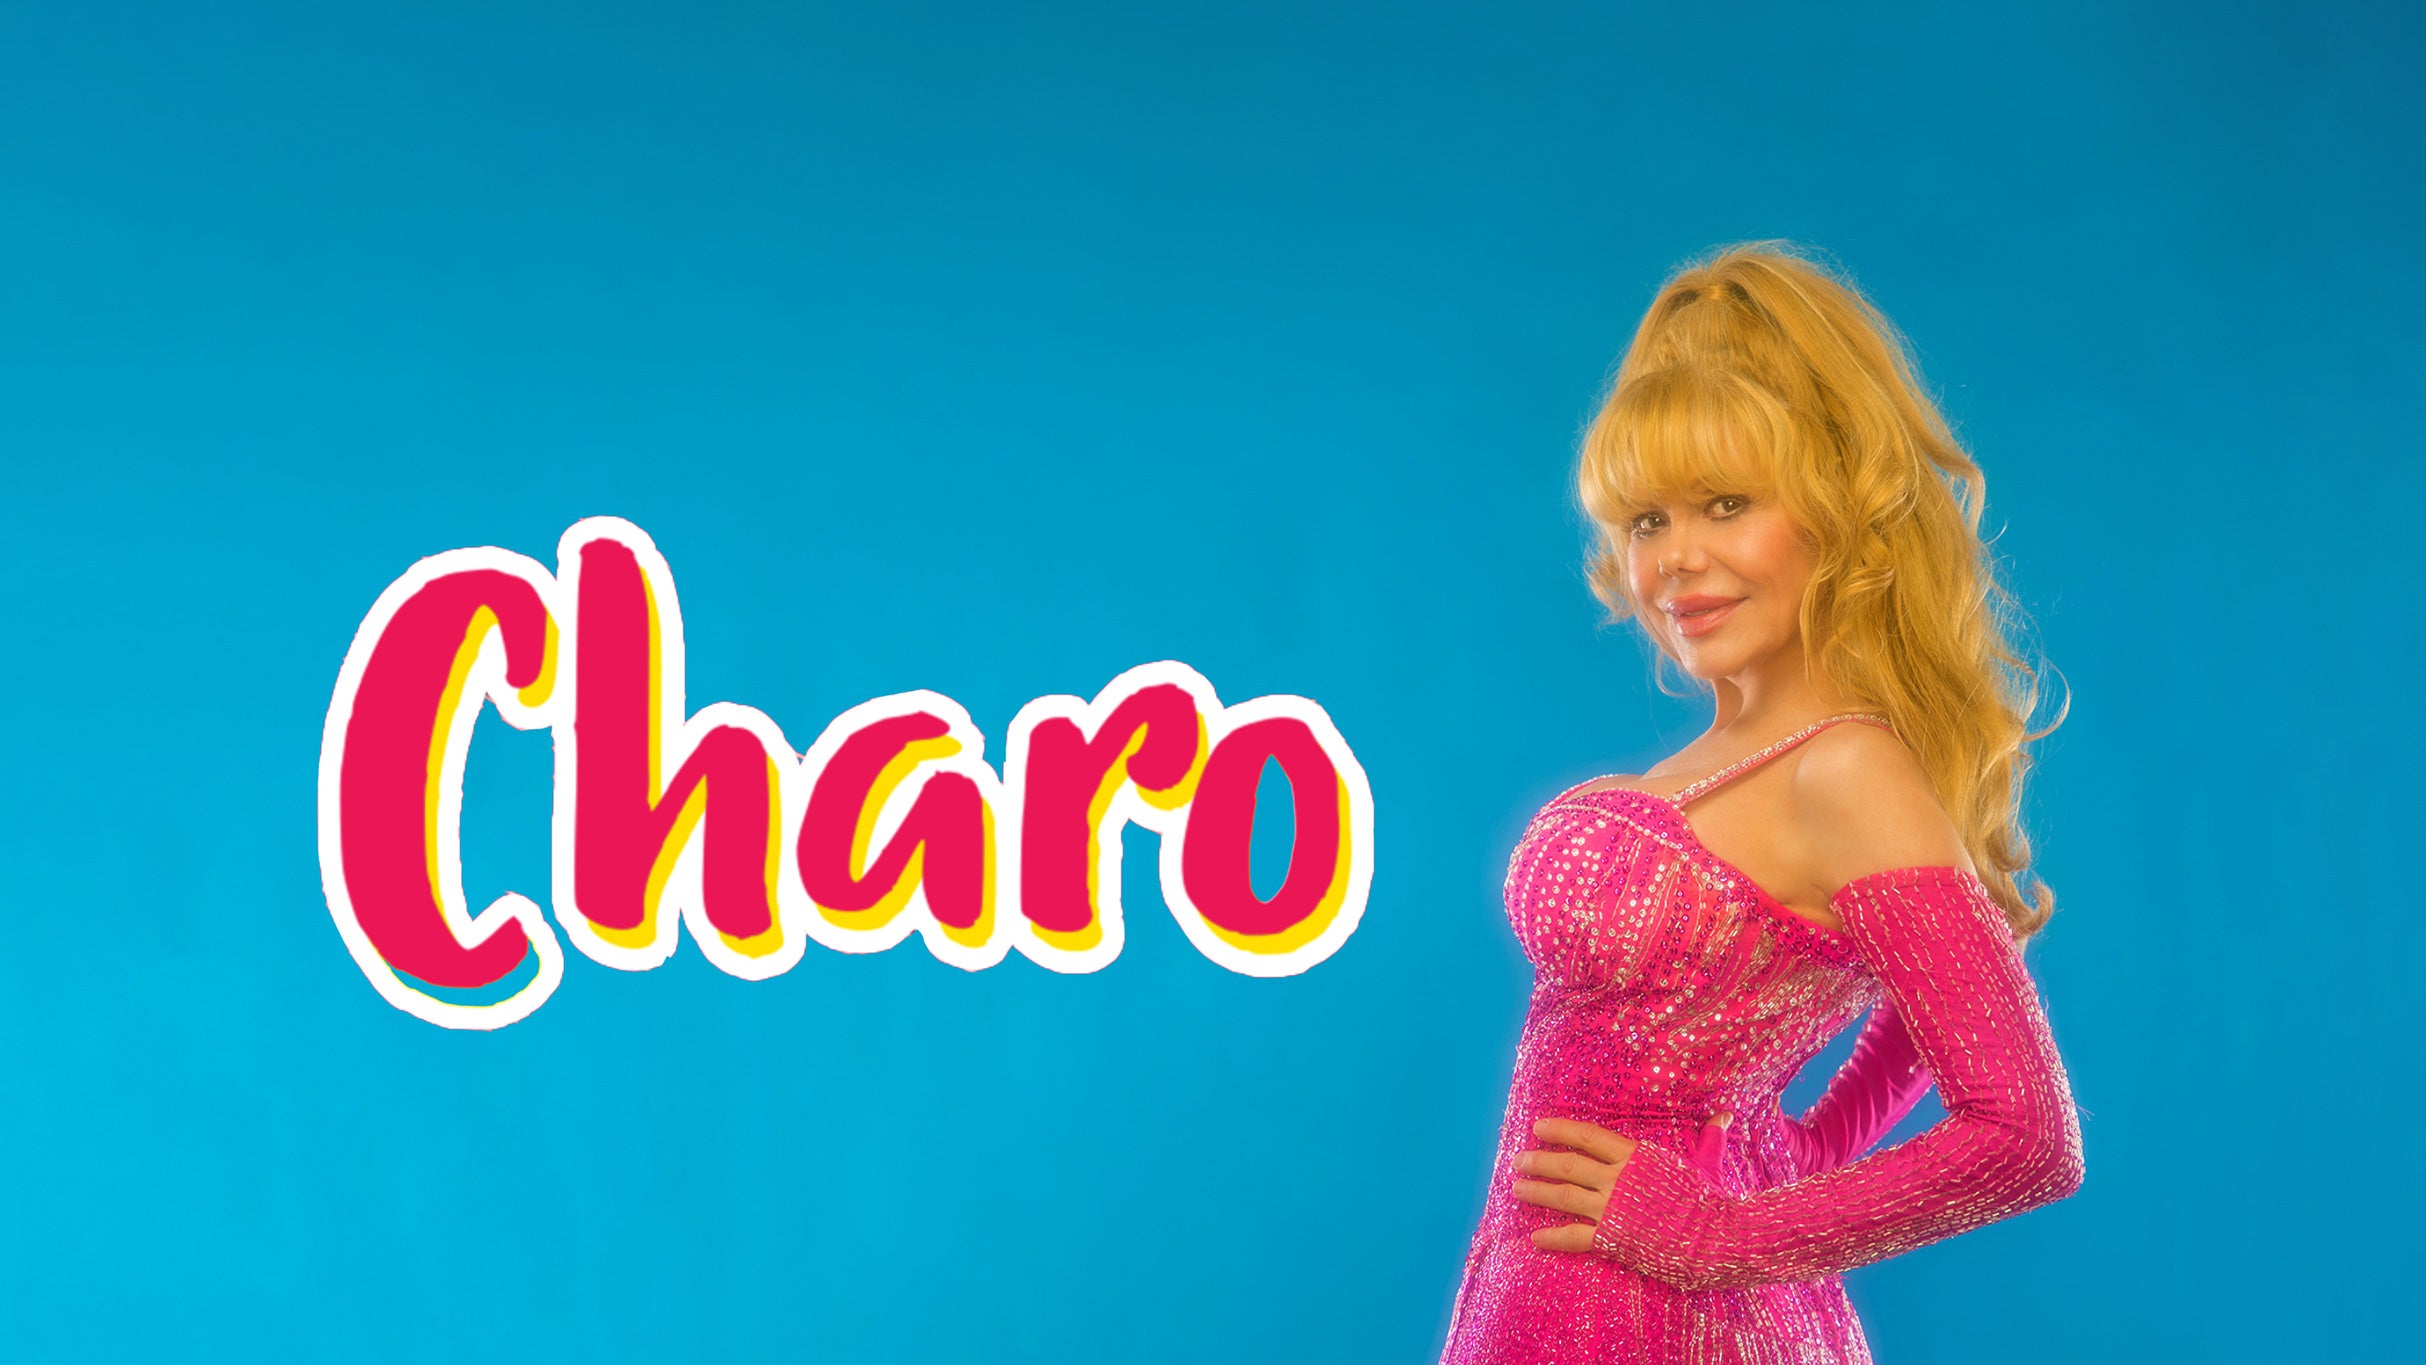 Charo at Bloomington Center for the Performing Arts